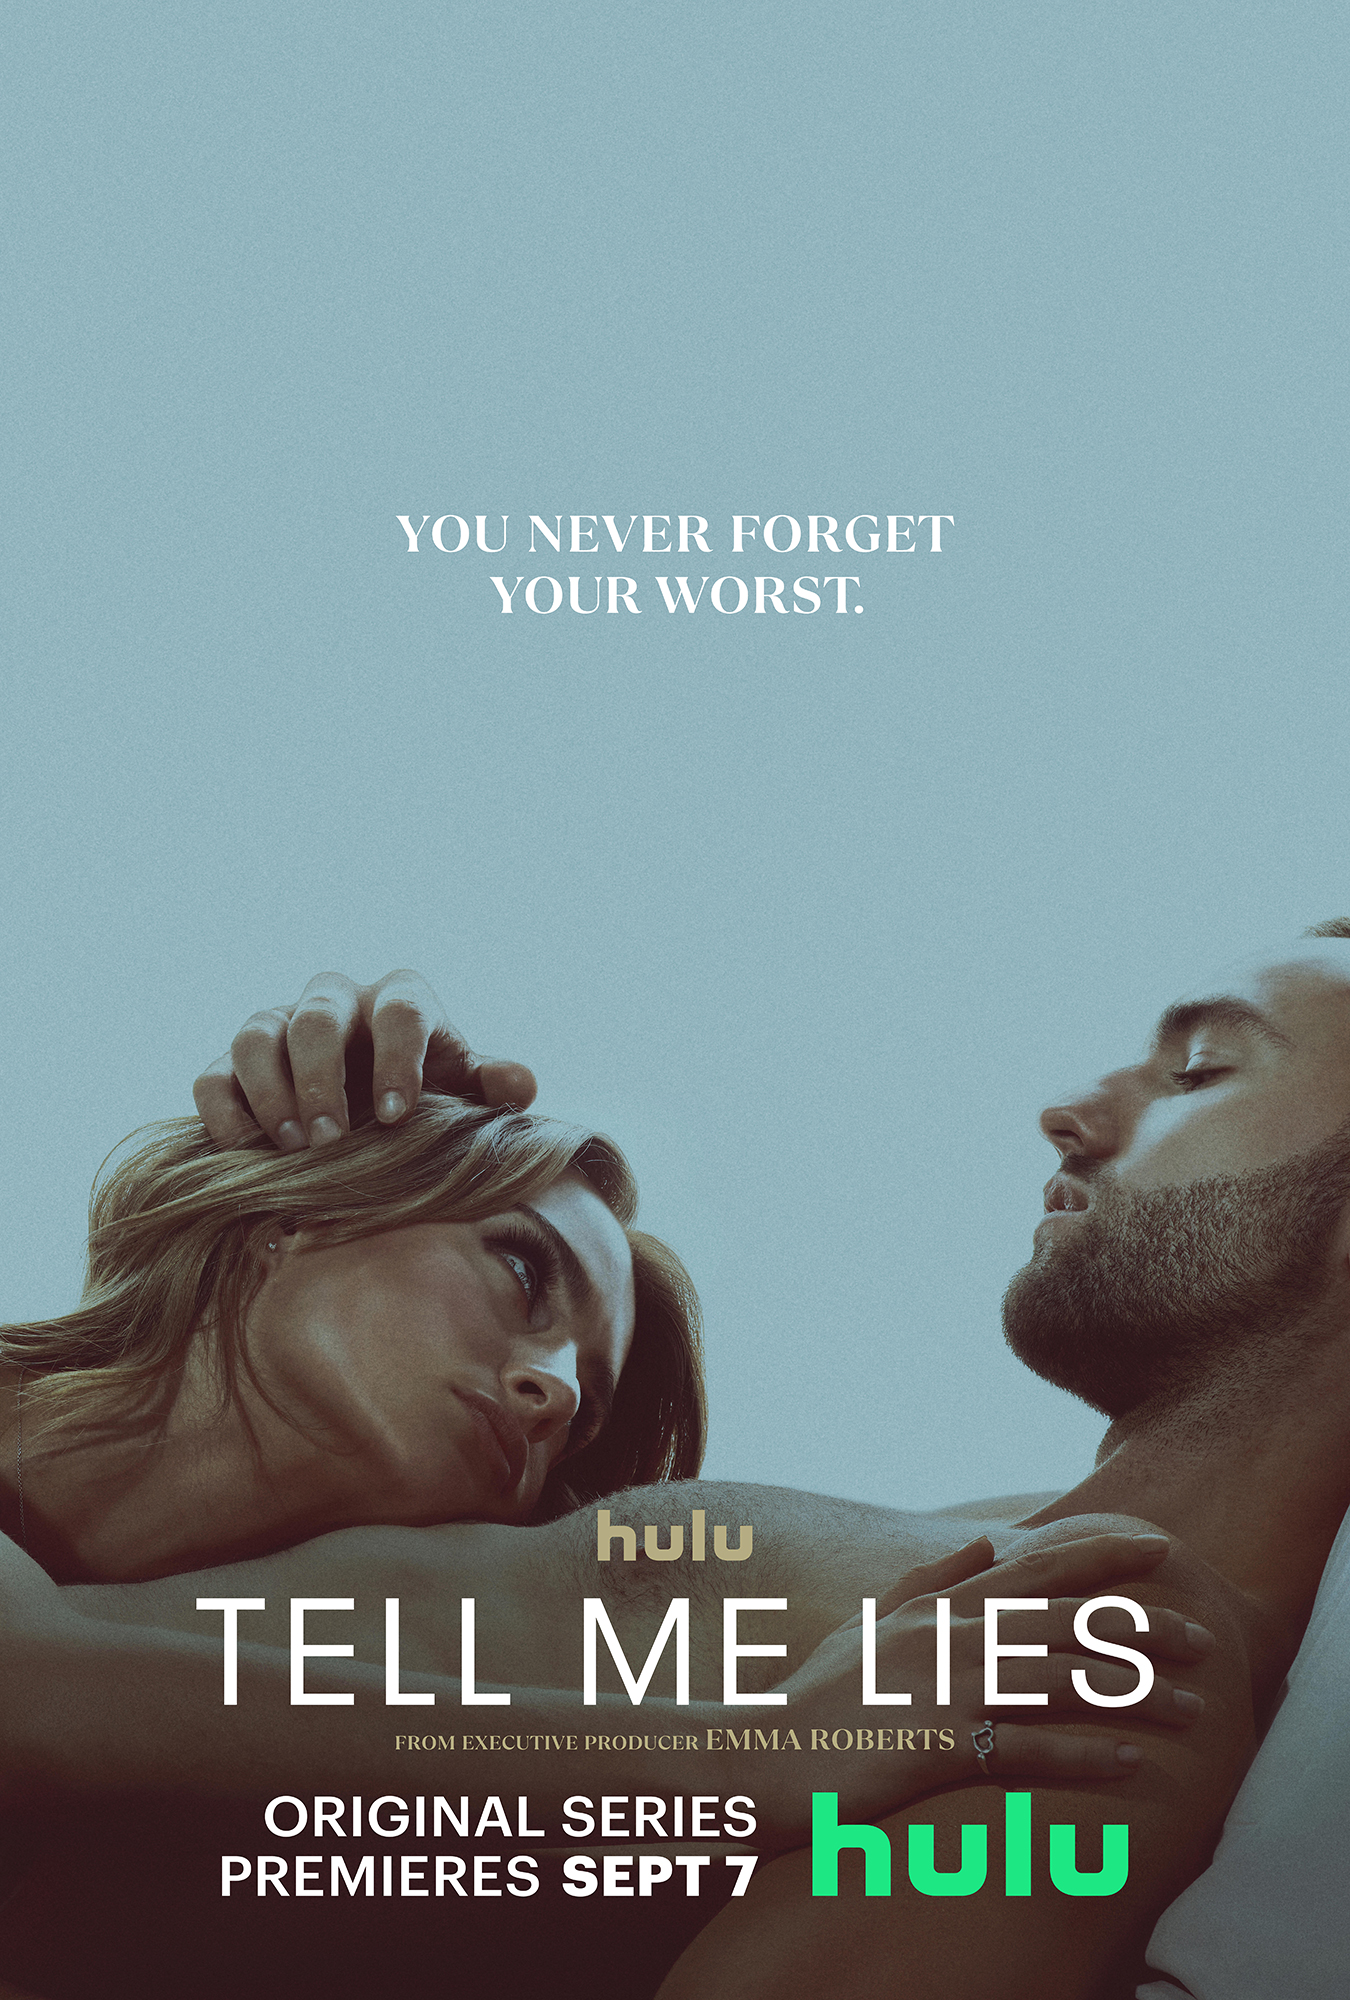 Tell Me Lies Everything to Know About Hulu's Upcoming TV Series About a Toxic Romance